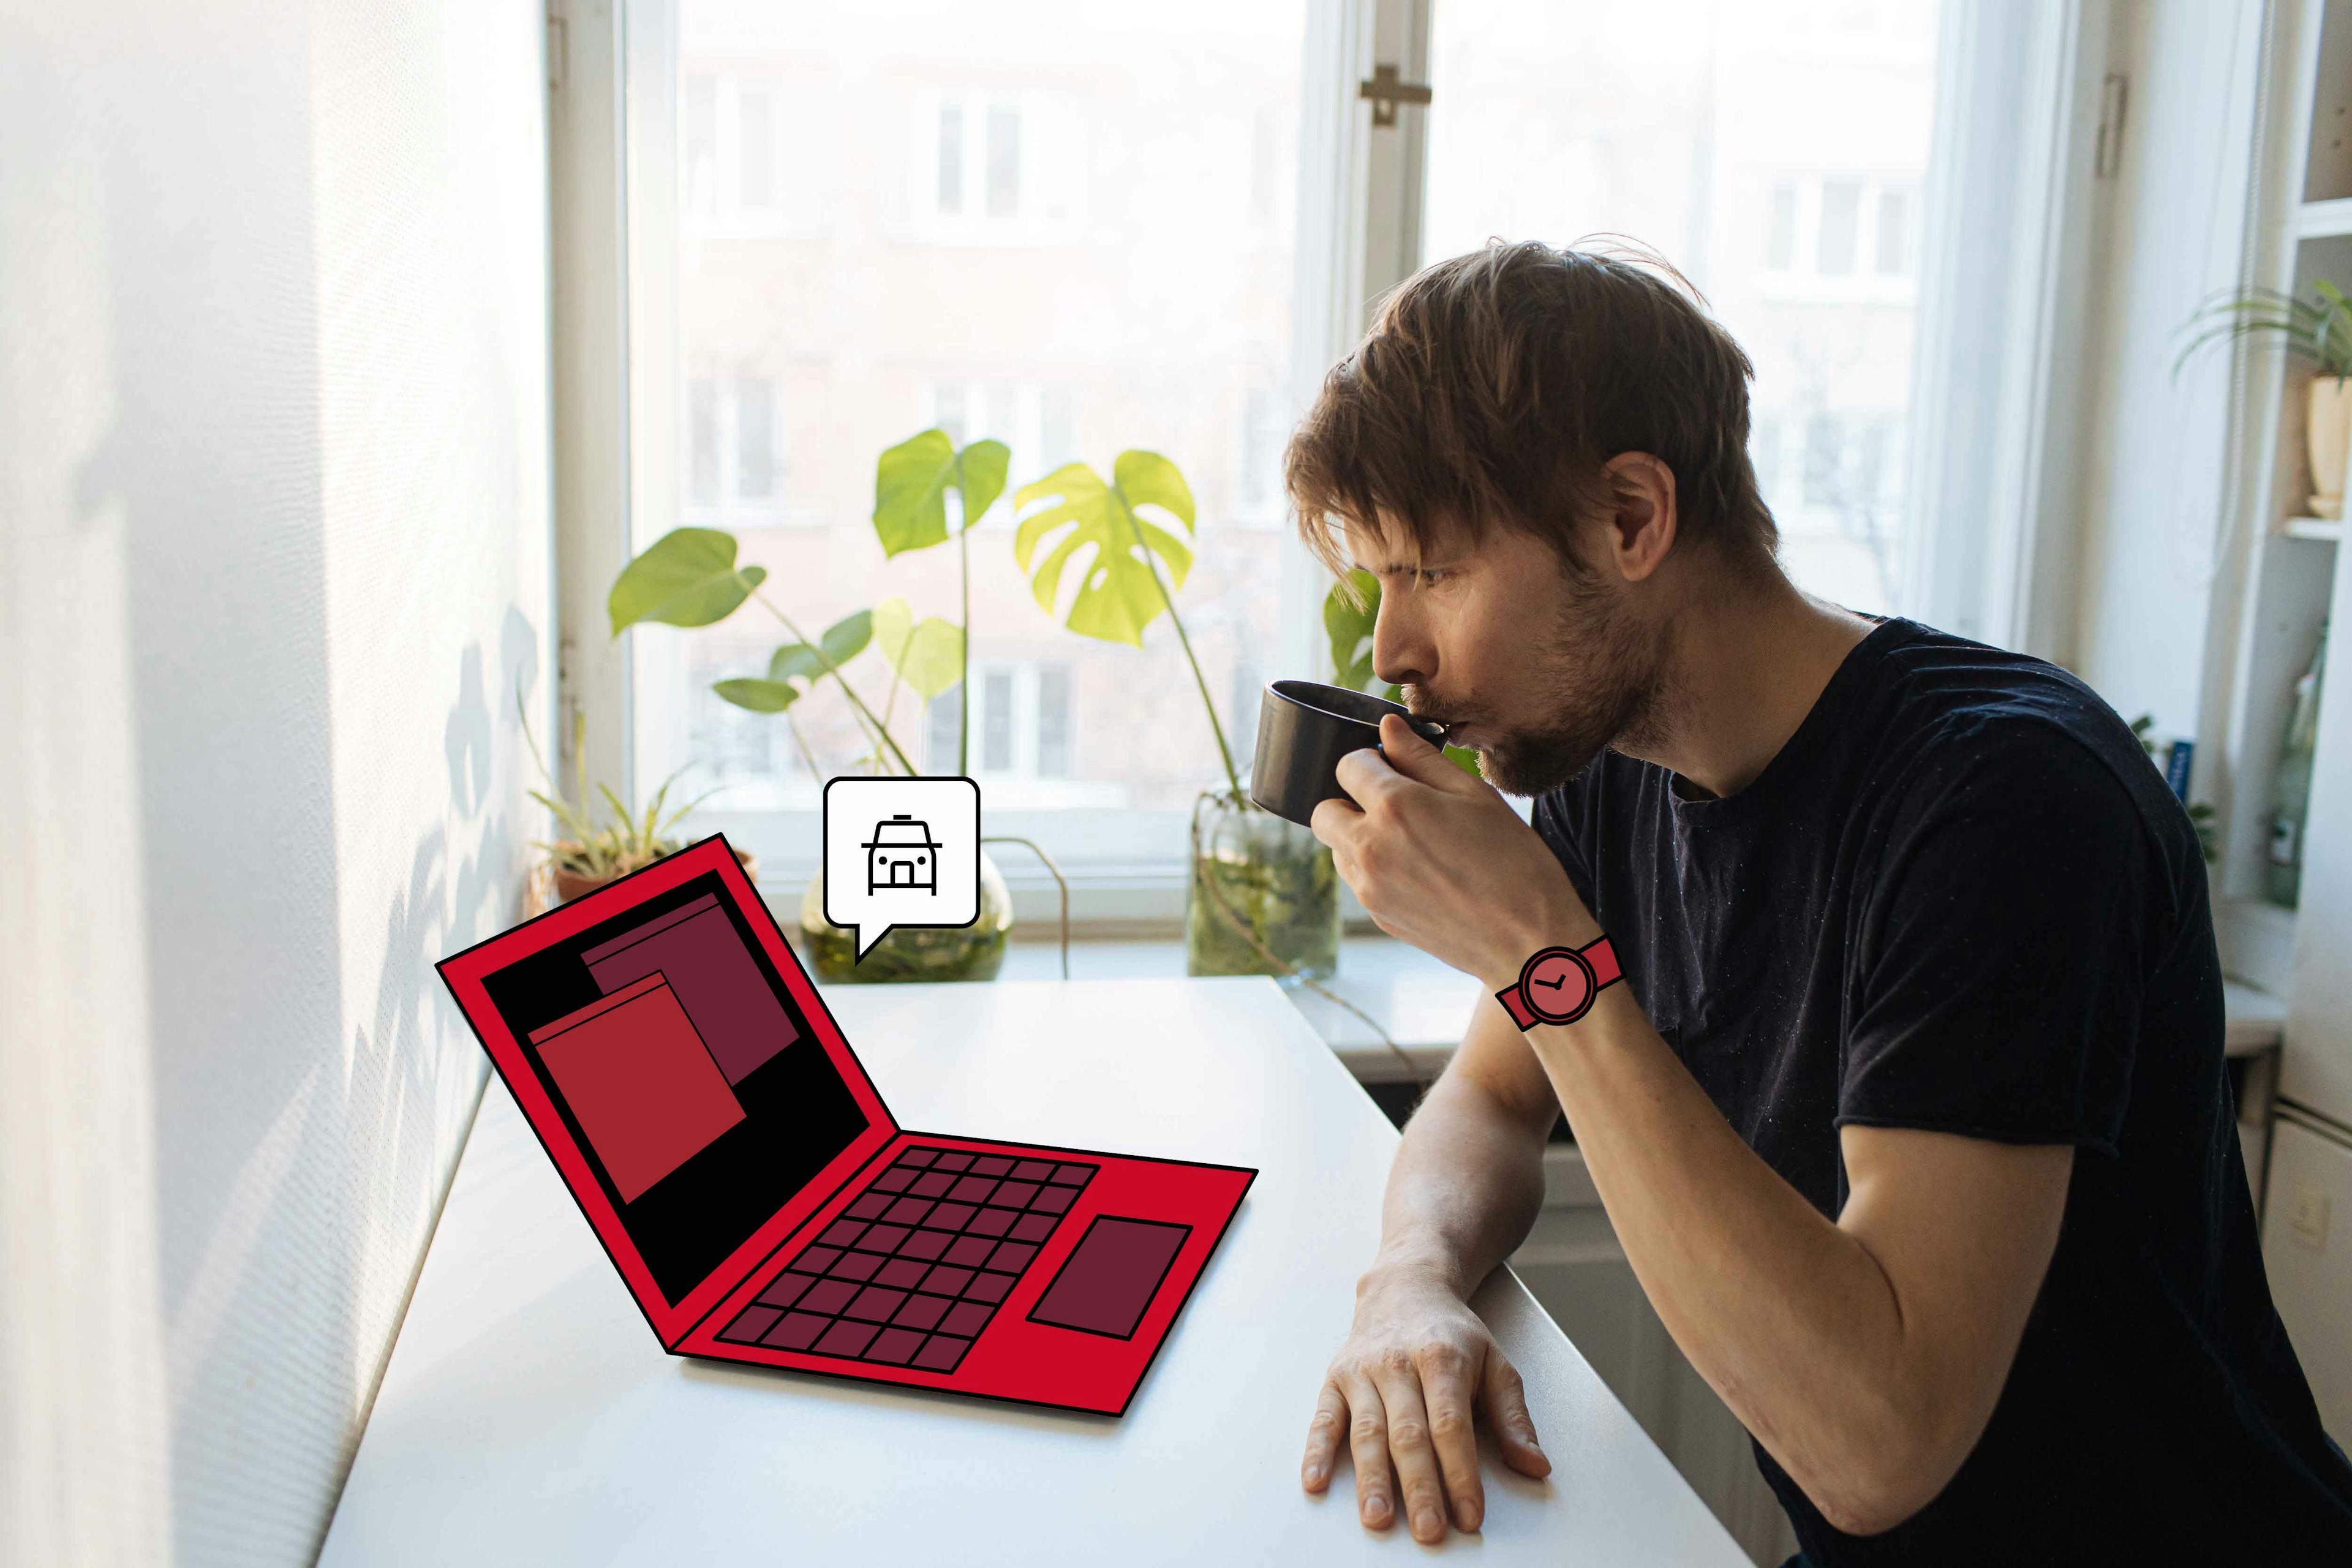 Man with watch drinking coffee or tea looking at laptop with taxi sticker and green plants in the background